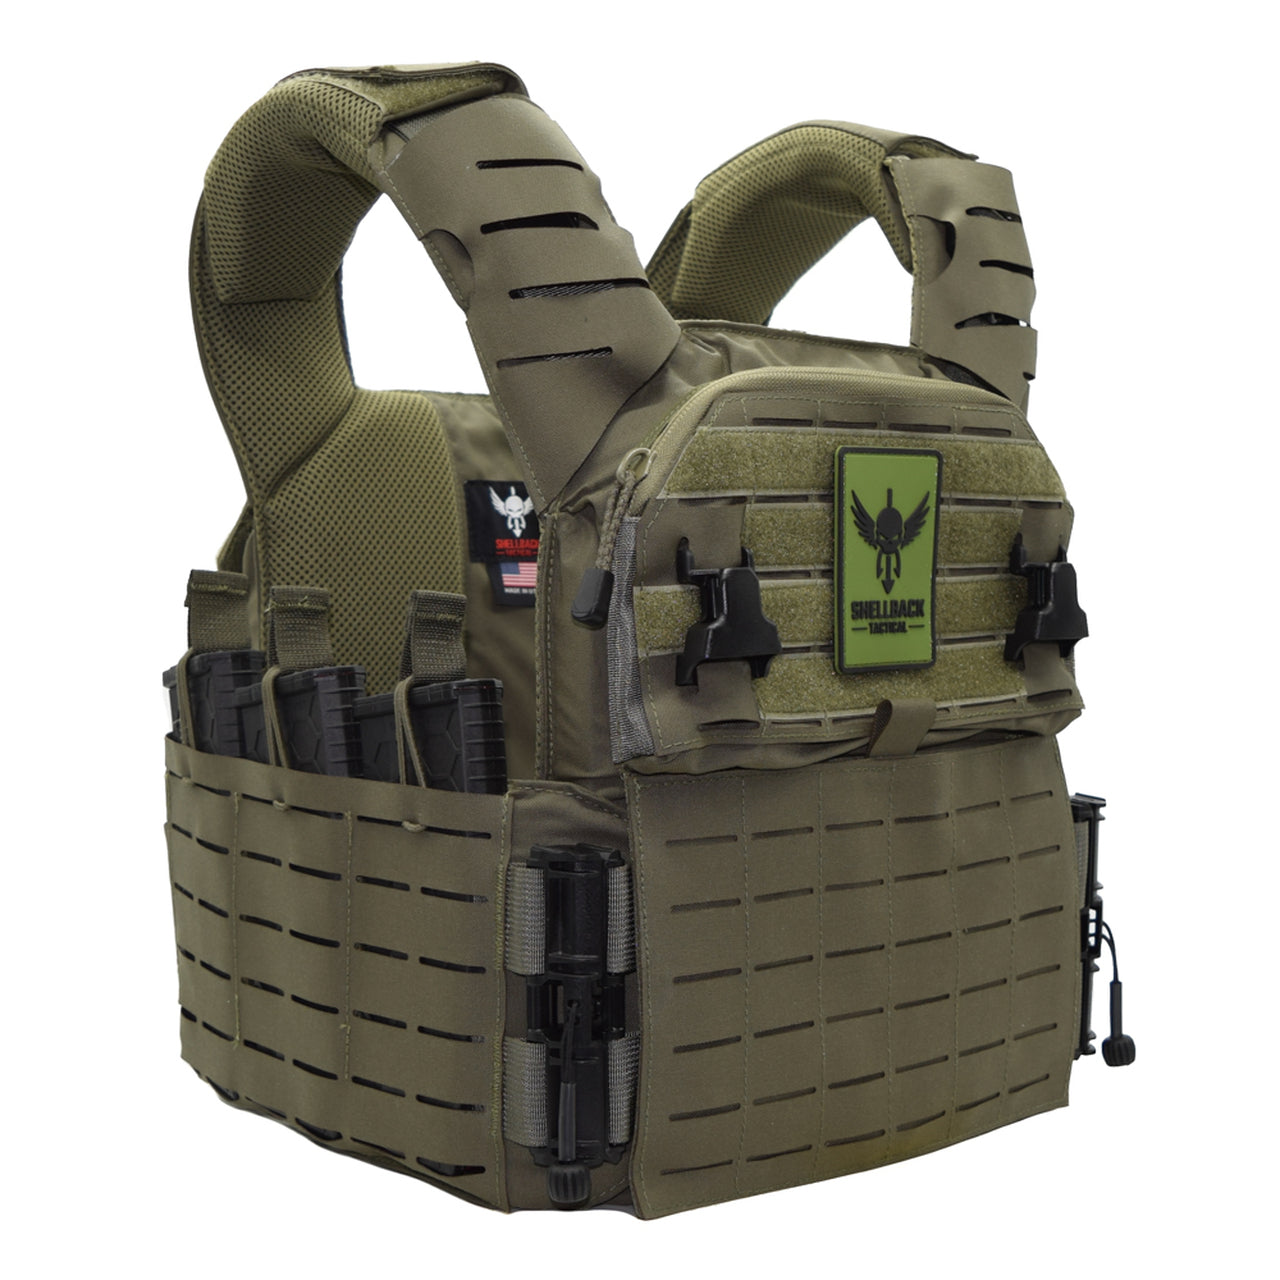 A Shellback Tactical Banshee Elite 3.0 Plate Carrier with a number of compartments.